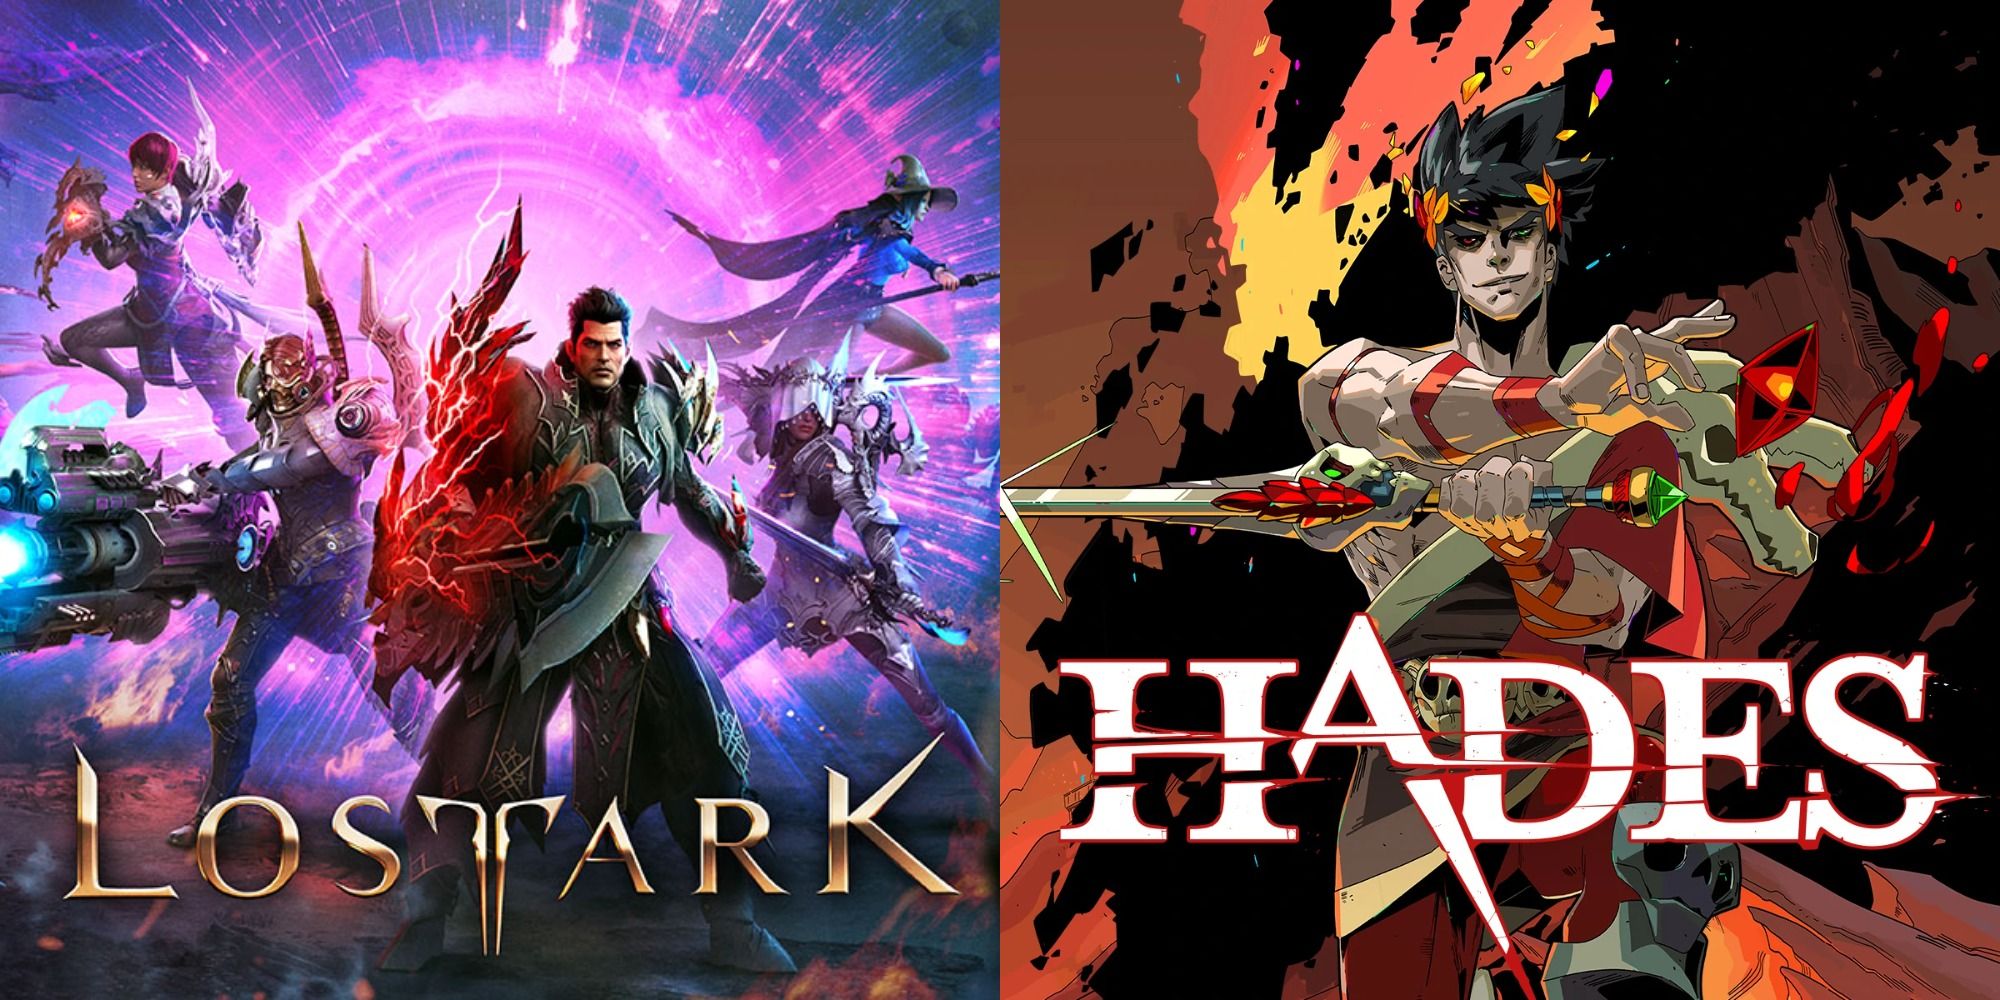 Split image showing posters for the games Lost Ark Hades